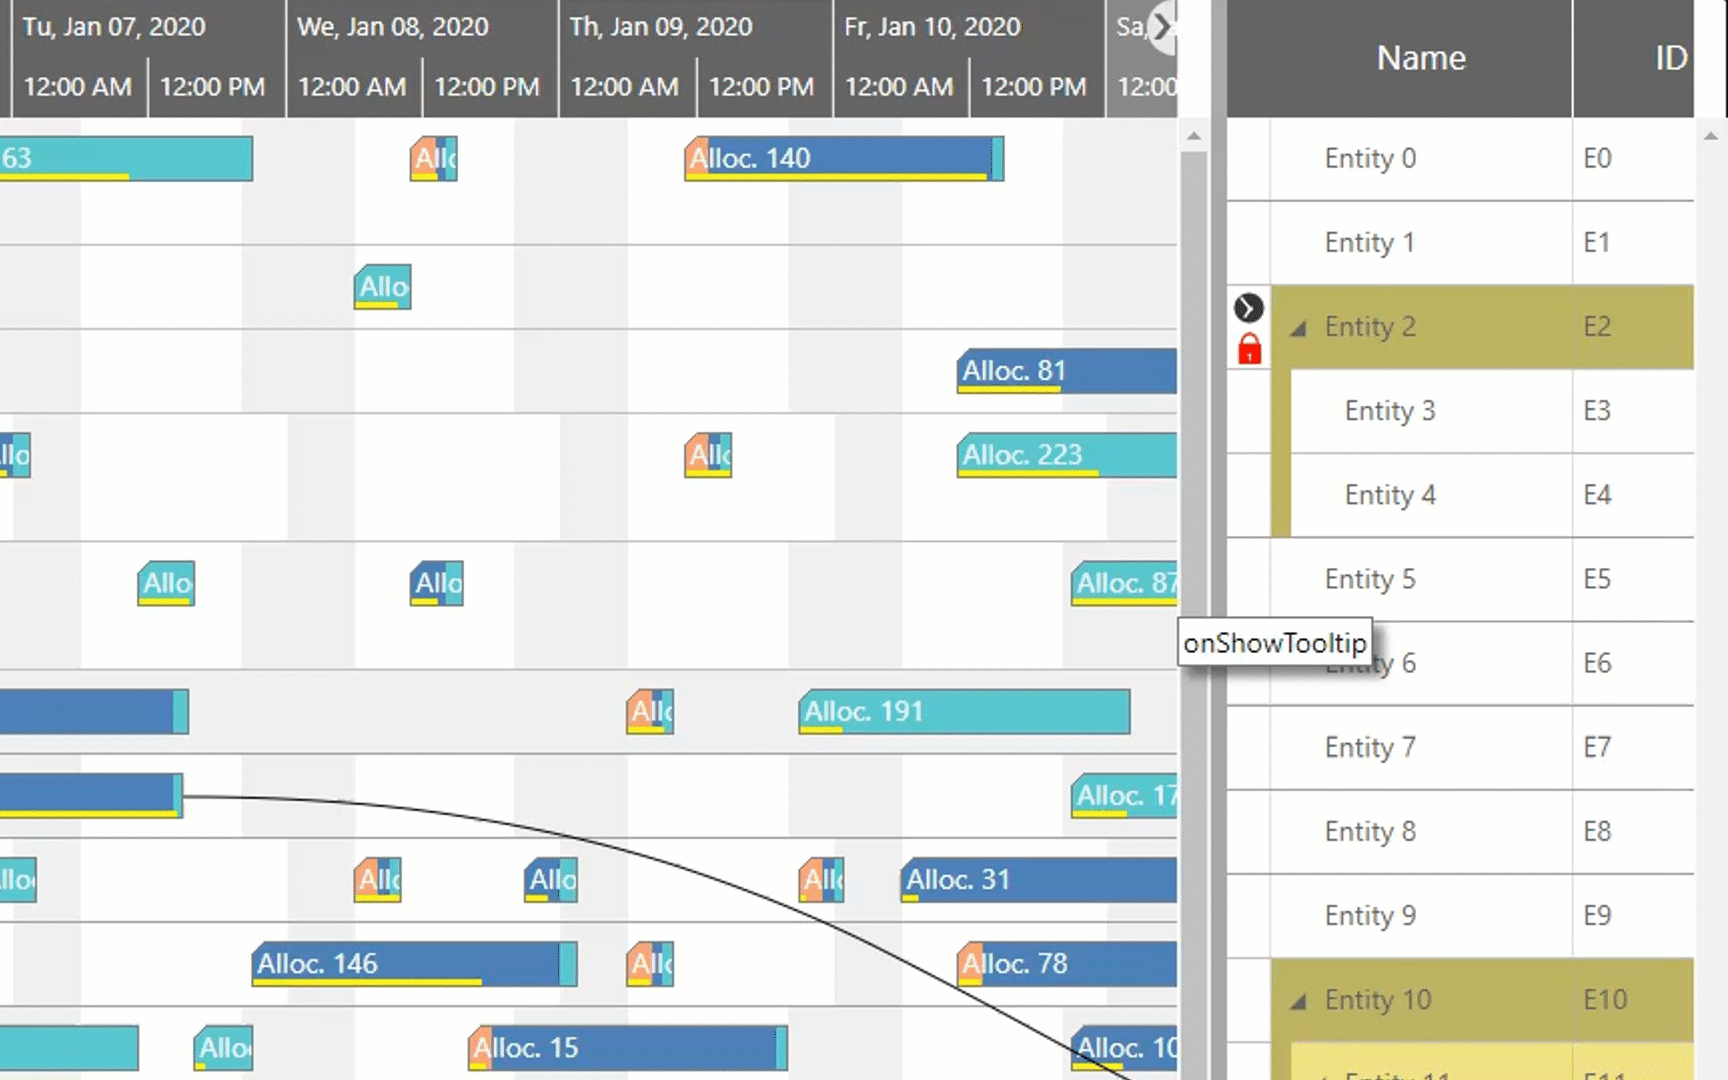 Backlog visualization by entities table in HTML5 Gantt charts